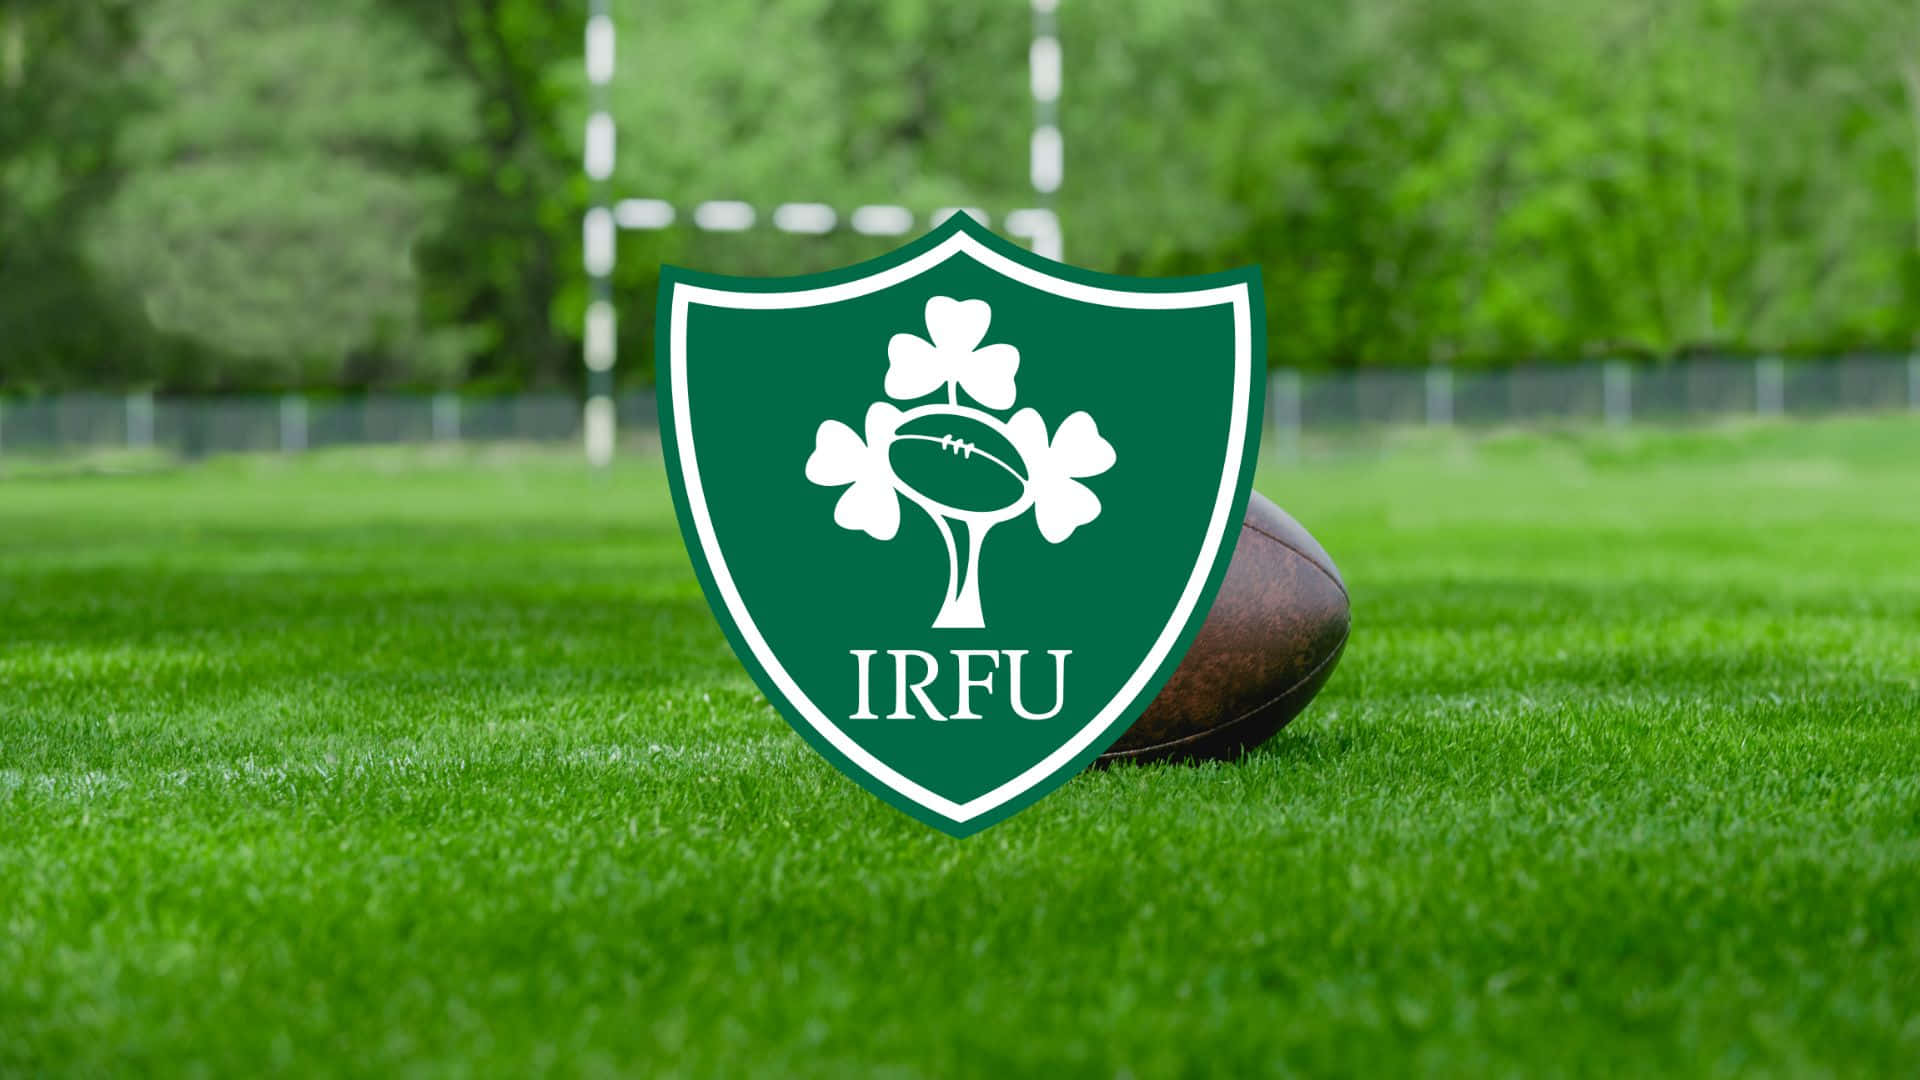 Green Momentum - Ireland Rugby Team in Action Wallpaper